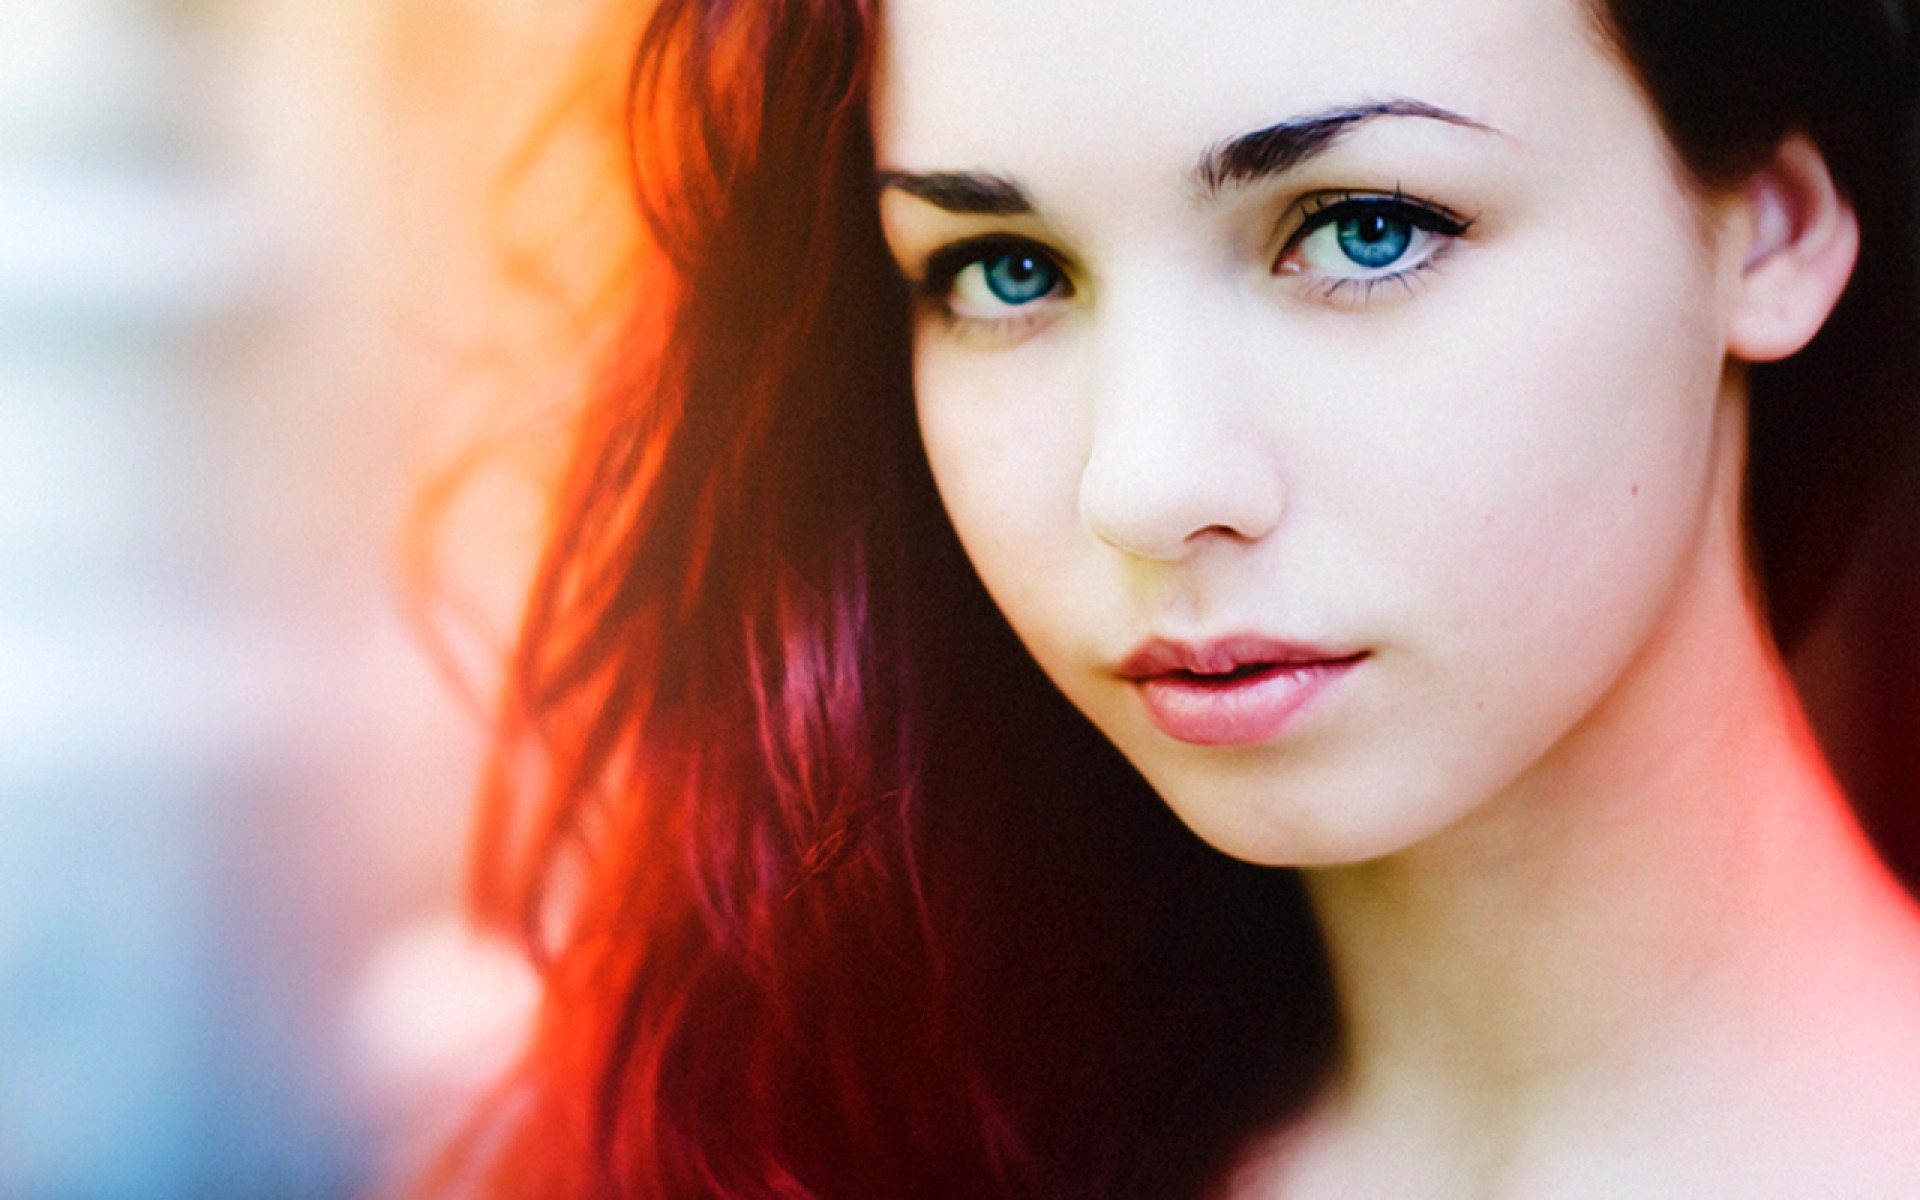 8. Red-haired and Blue-eyed Beauty - wide 7